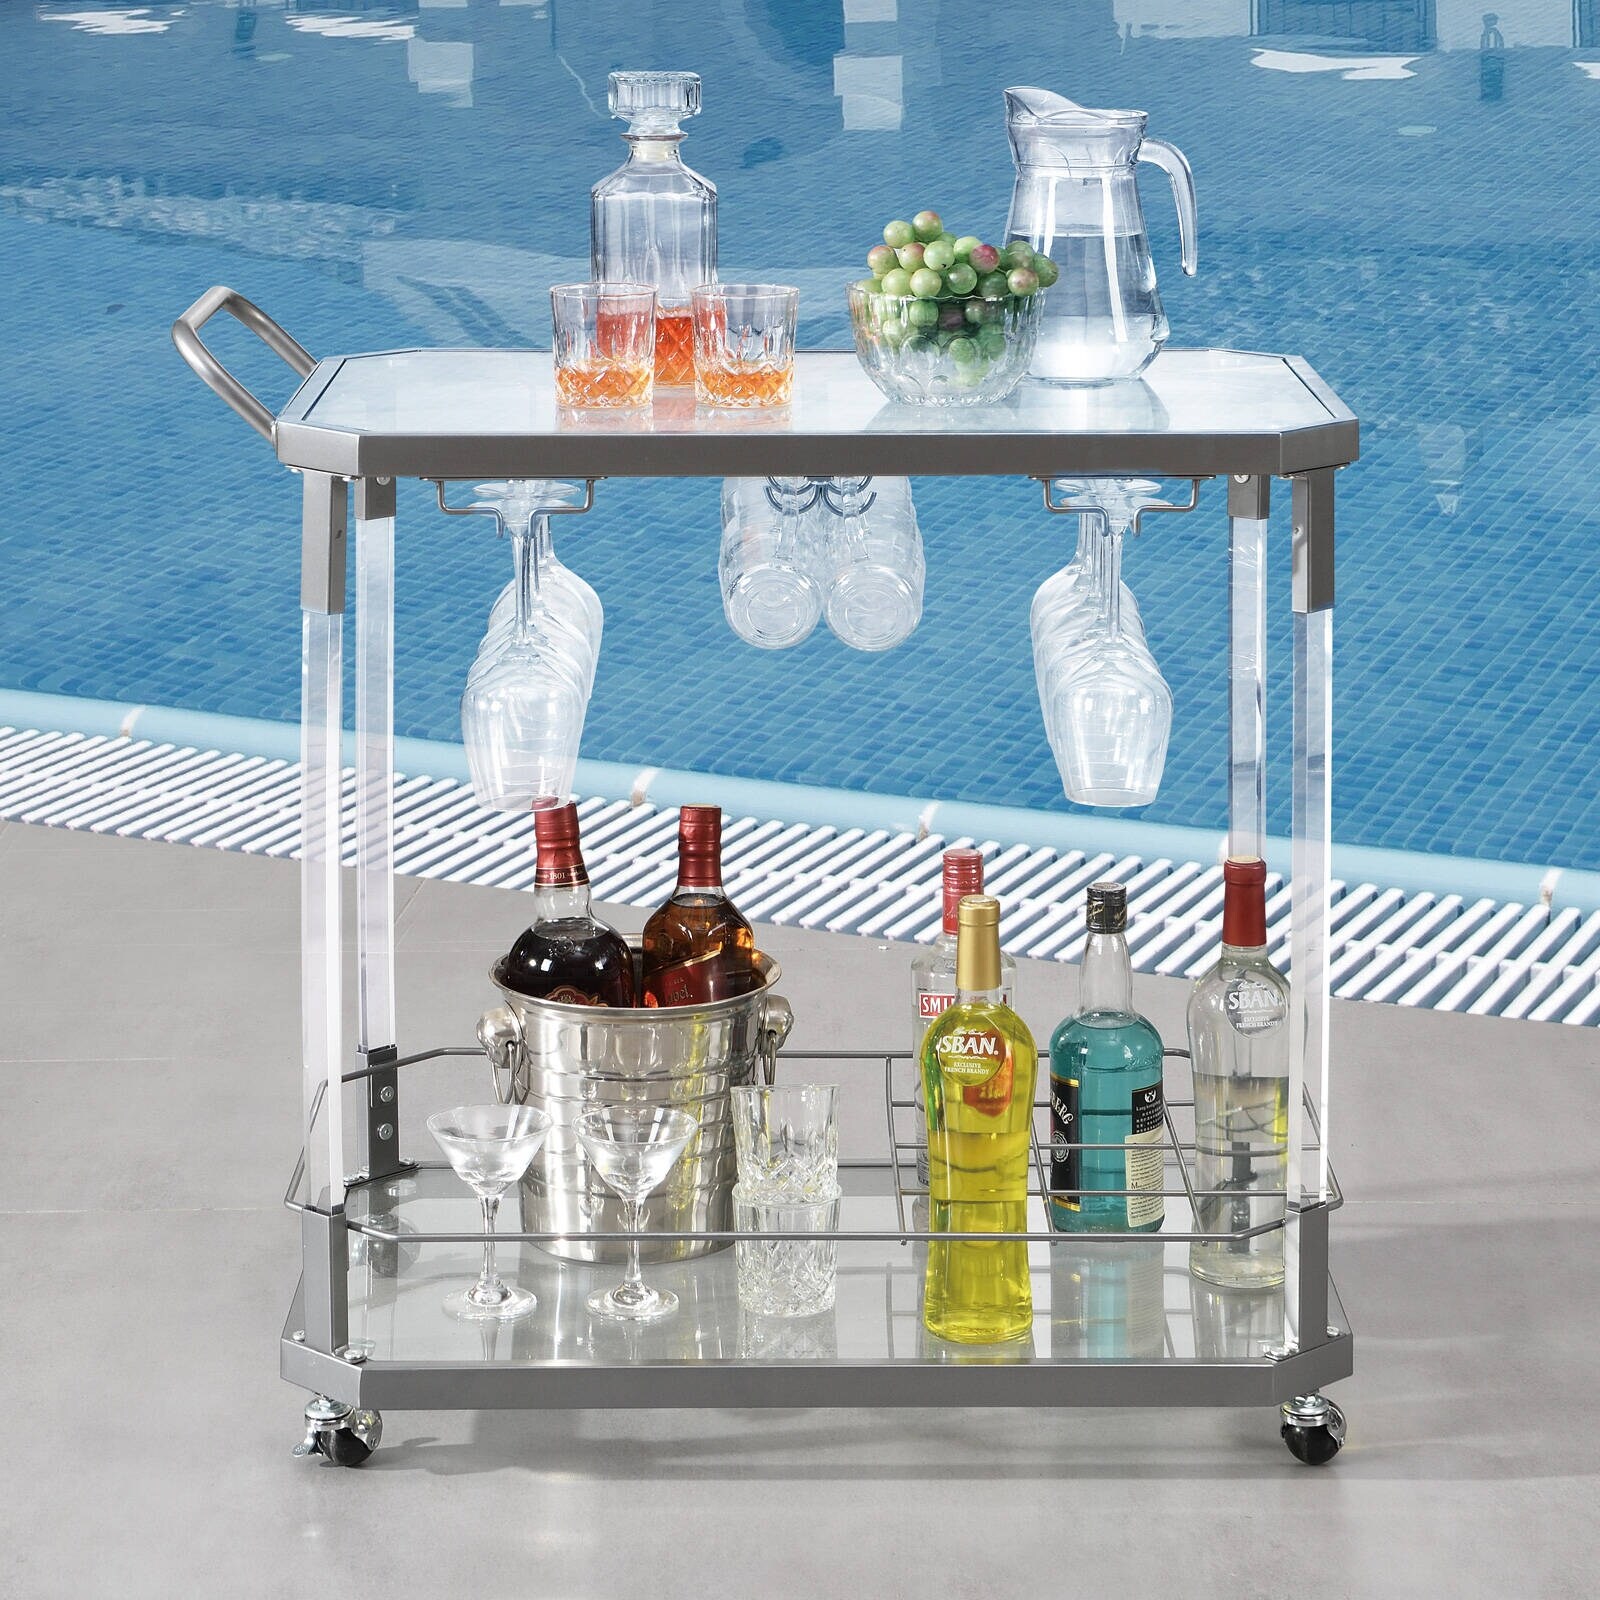 https://ak1.ostkcdn.com/images/products/is/images/direct/48cc09d737c1c57d6c4e50f5b152173b585063de/Hausfame-Home-Bars-Cart-Glass-Metal-Chrome-Clear-Modern-Wine-Rack.jpg